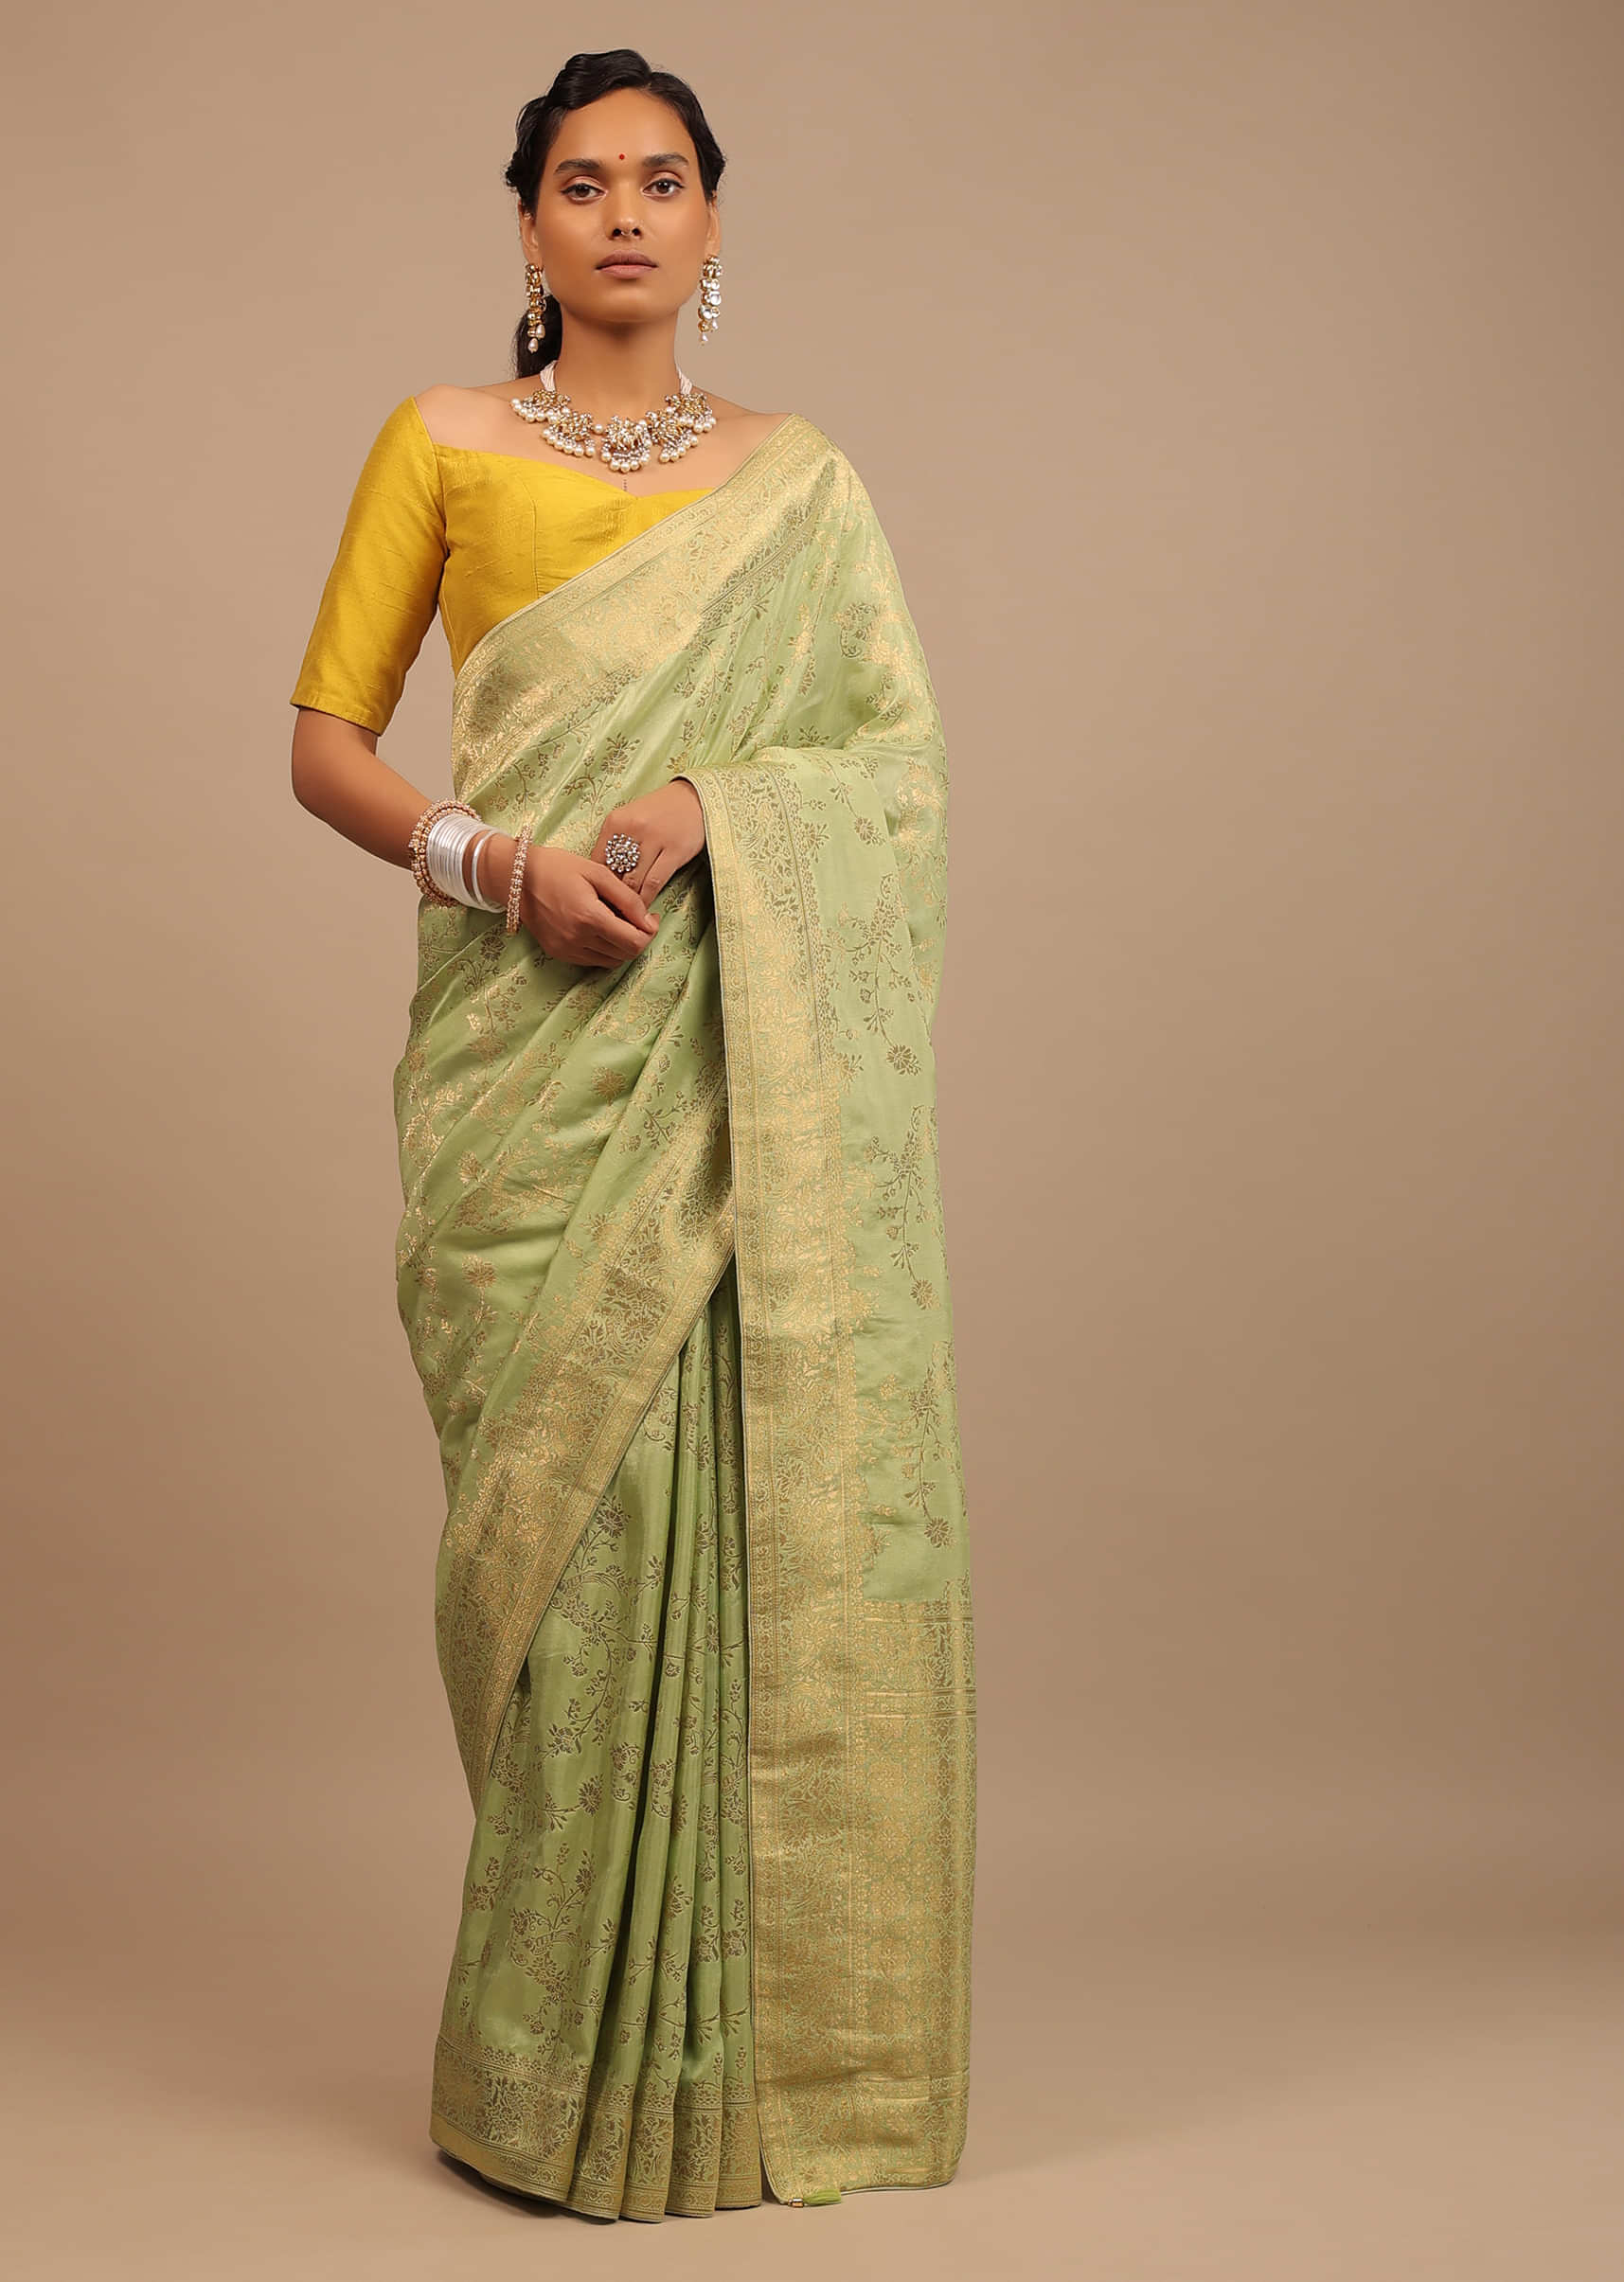 Pista Green Saree In Dola Silk With Woven Floral Jaal And Moroccan Weave On Pallu